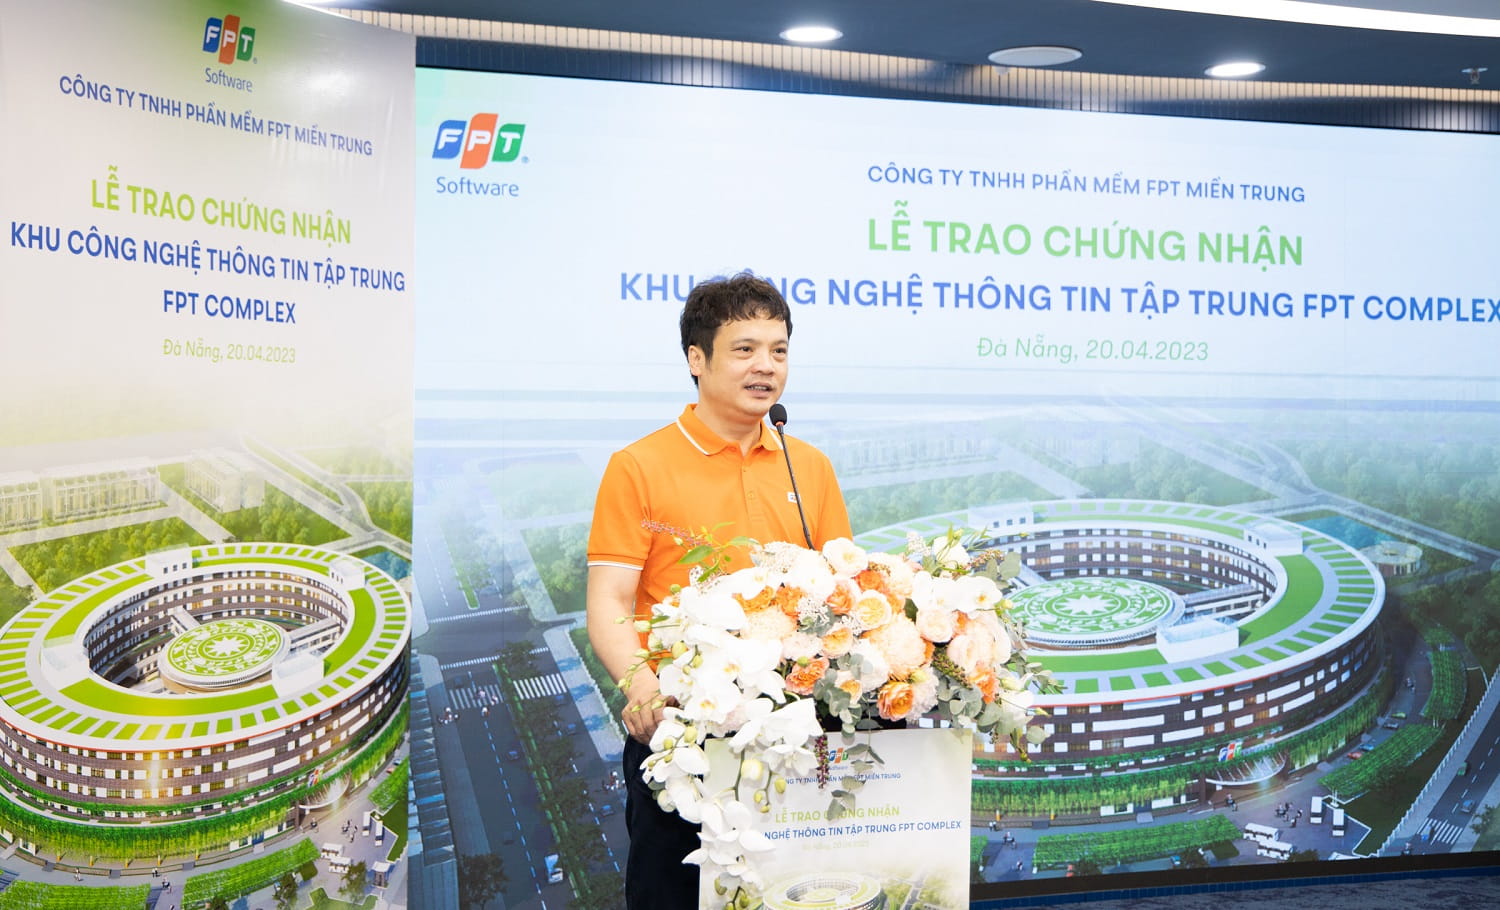 FPT's CEO Nguyen Van Khoa was sharing at the event.